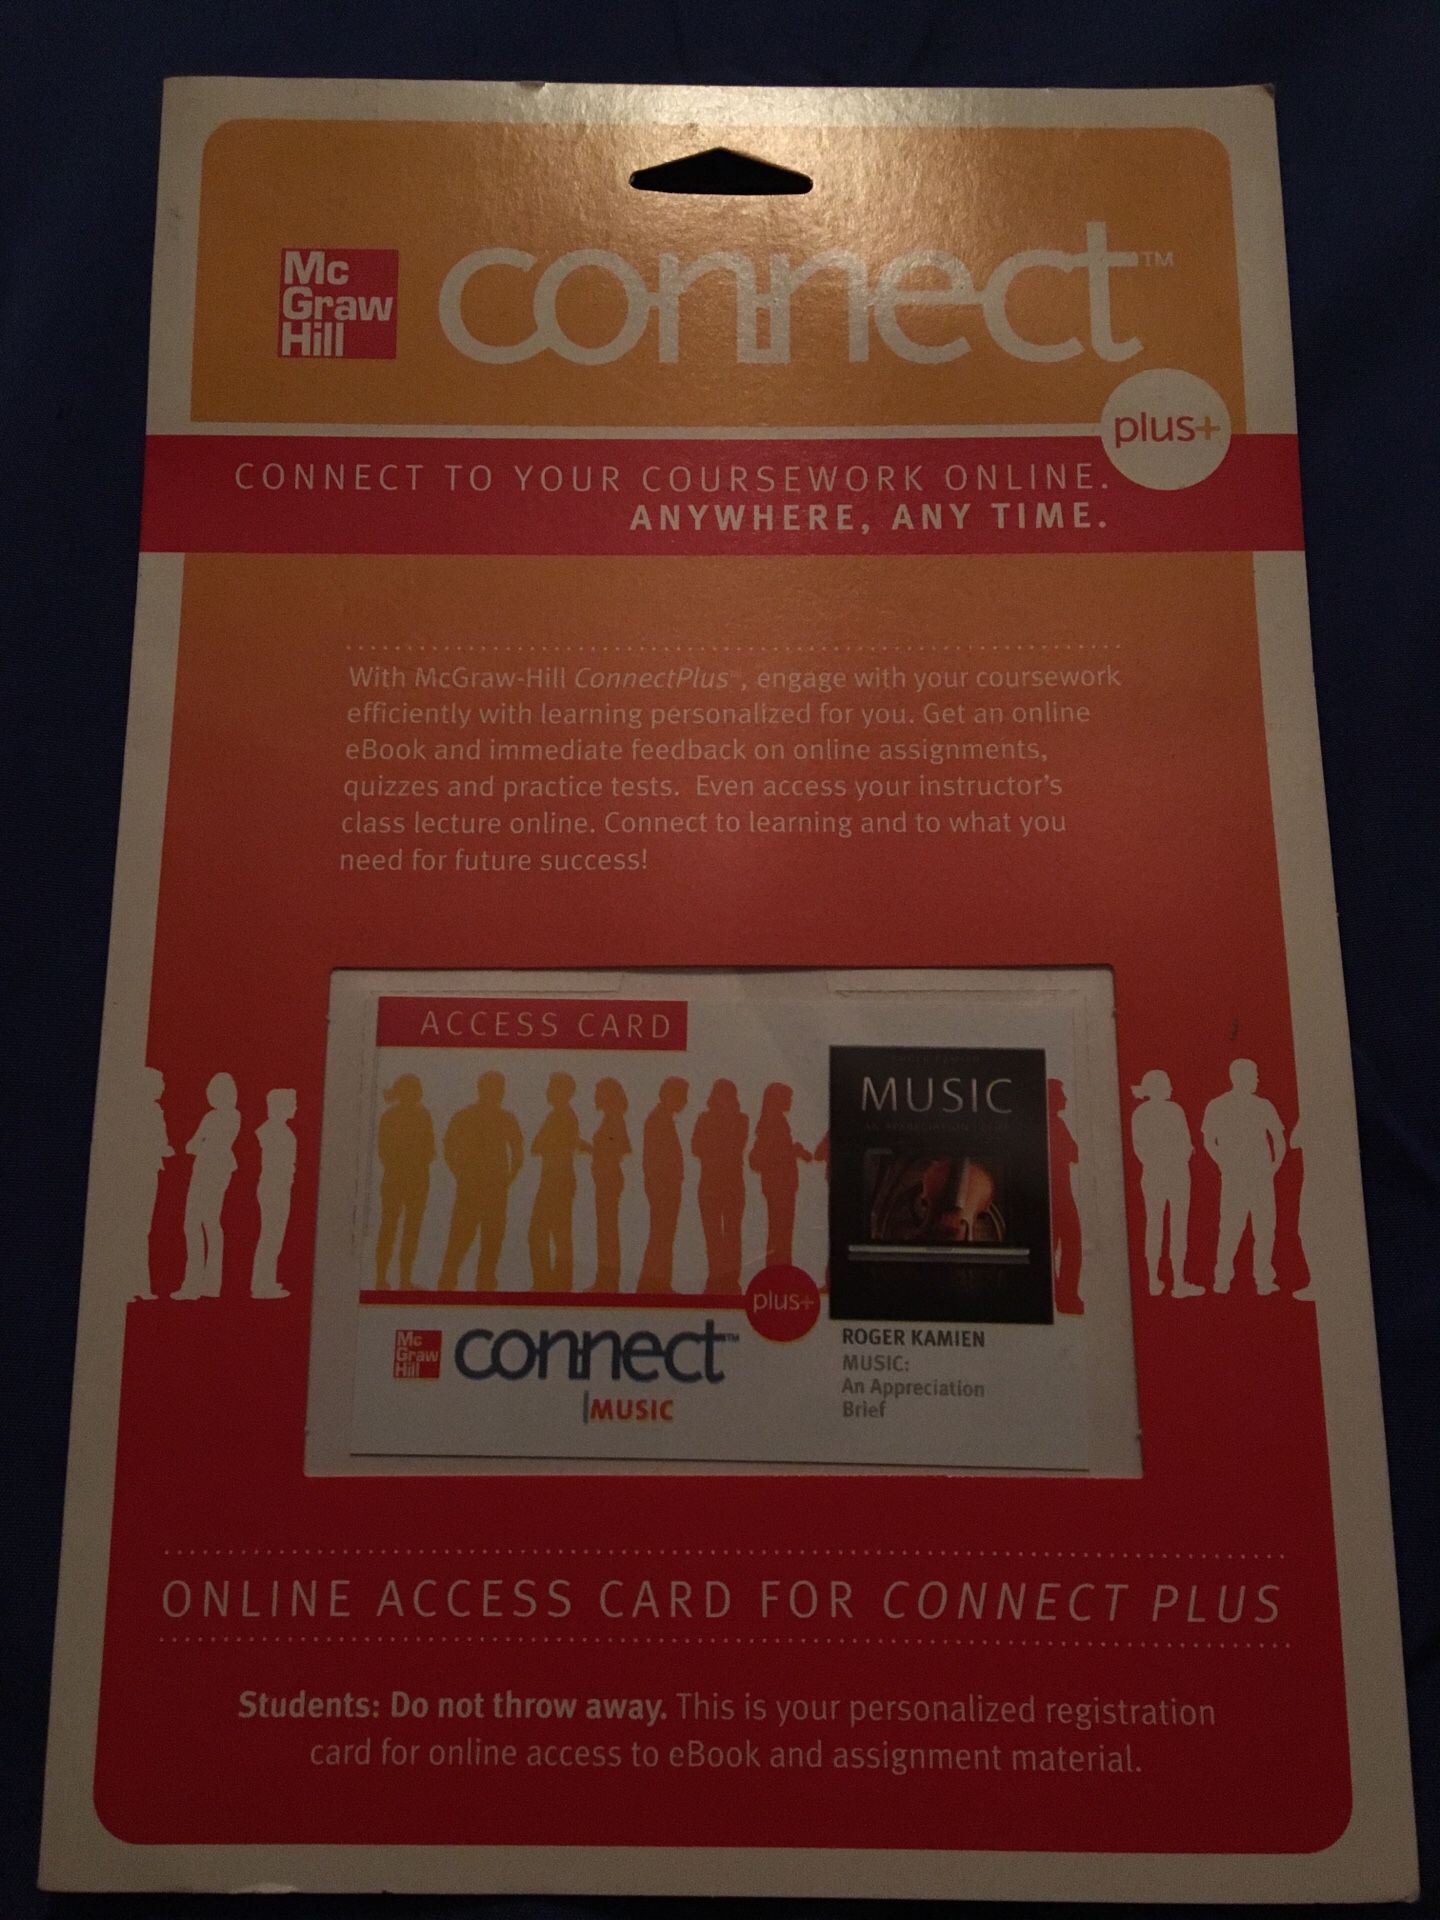 Roger Kamien Music: An appreciation Online access card for connect plus